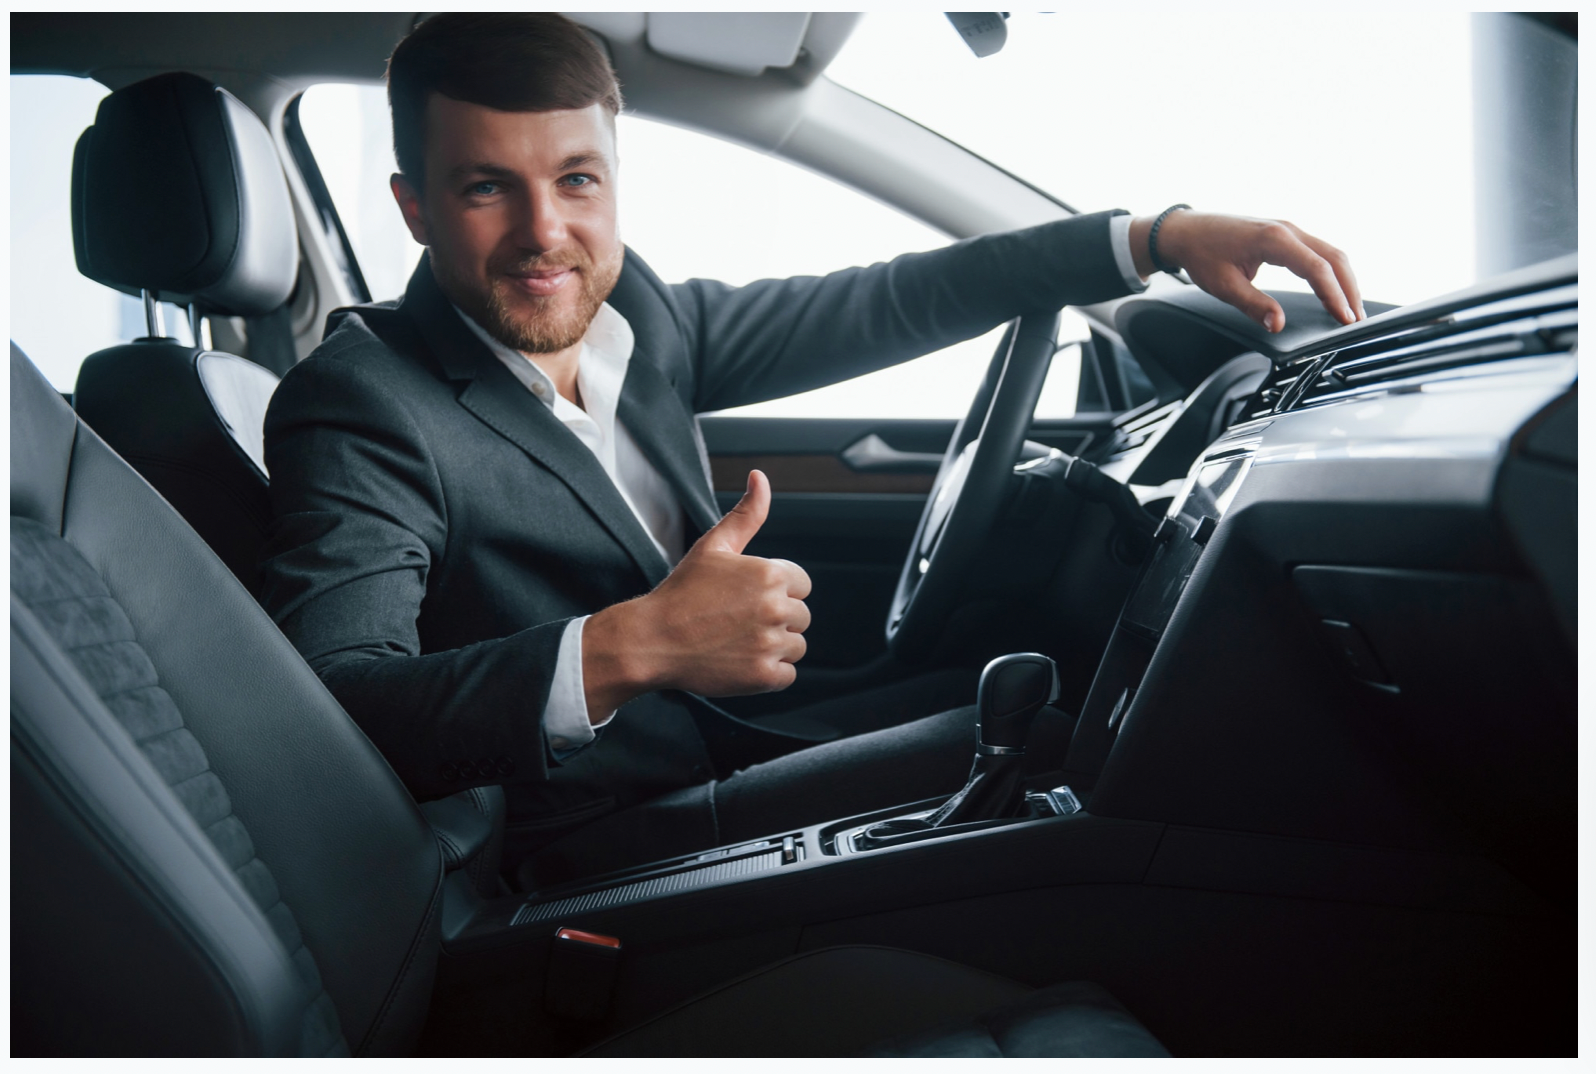 https://www.freepik.com/free-photo/that-s-awesome-modern-businessman-trying-his-new-car-automobile-salon_9818418.htm#query=store%20a%20car&position=29&from_view=search